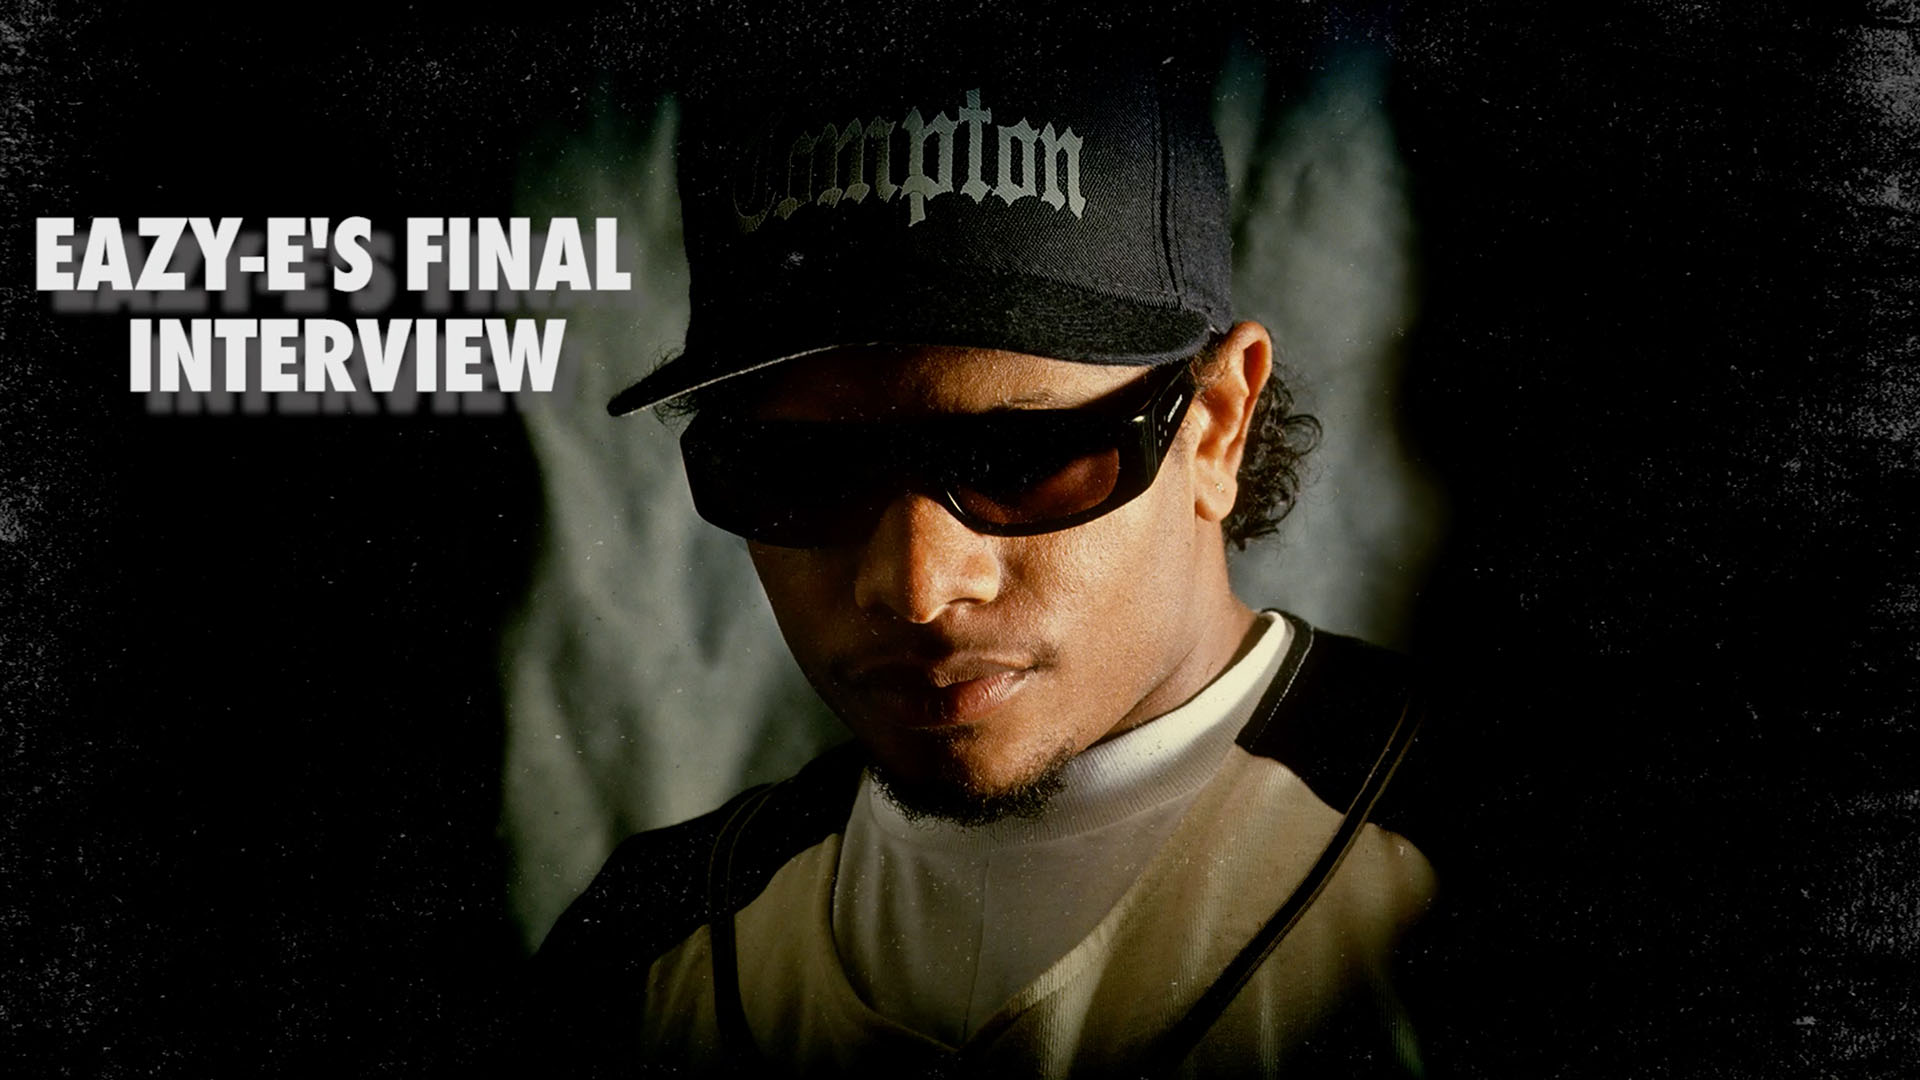 Road to the Truth: The FBI Never Warned Eazy-E!